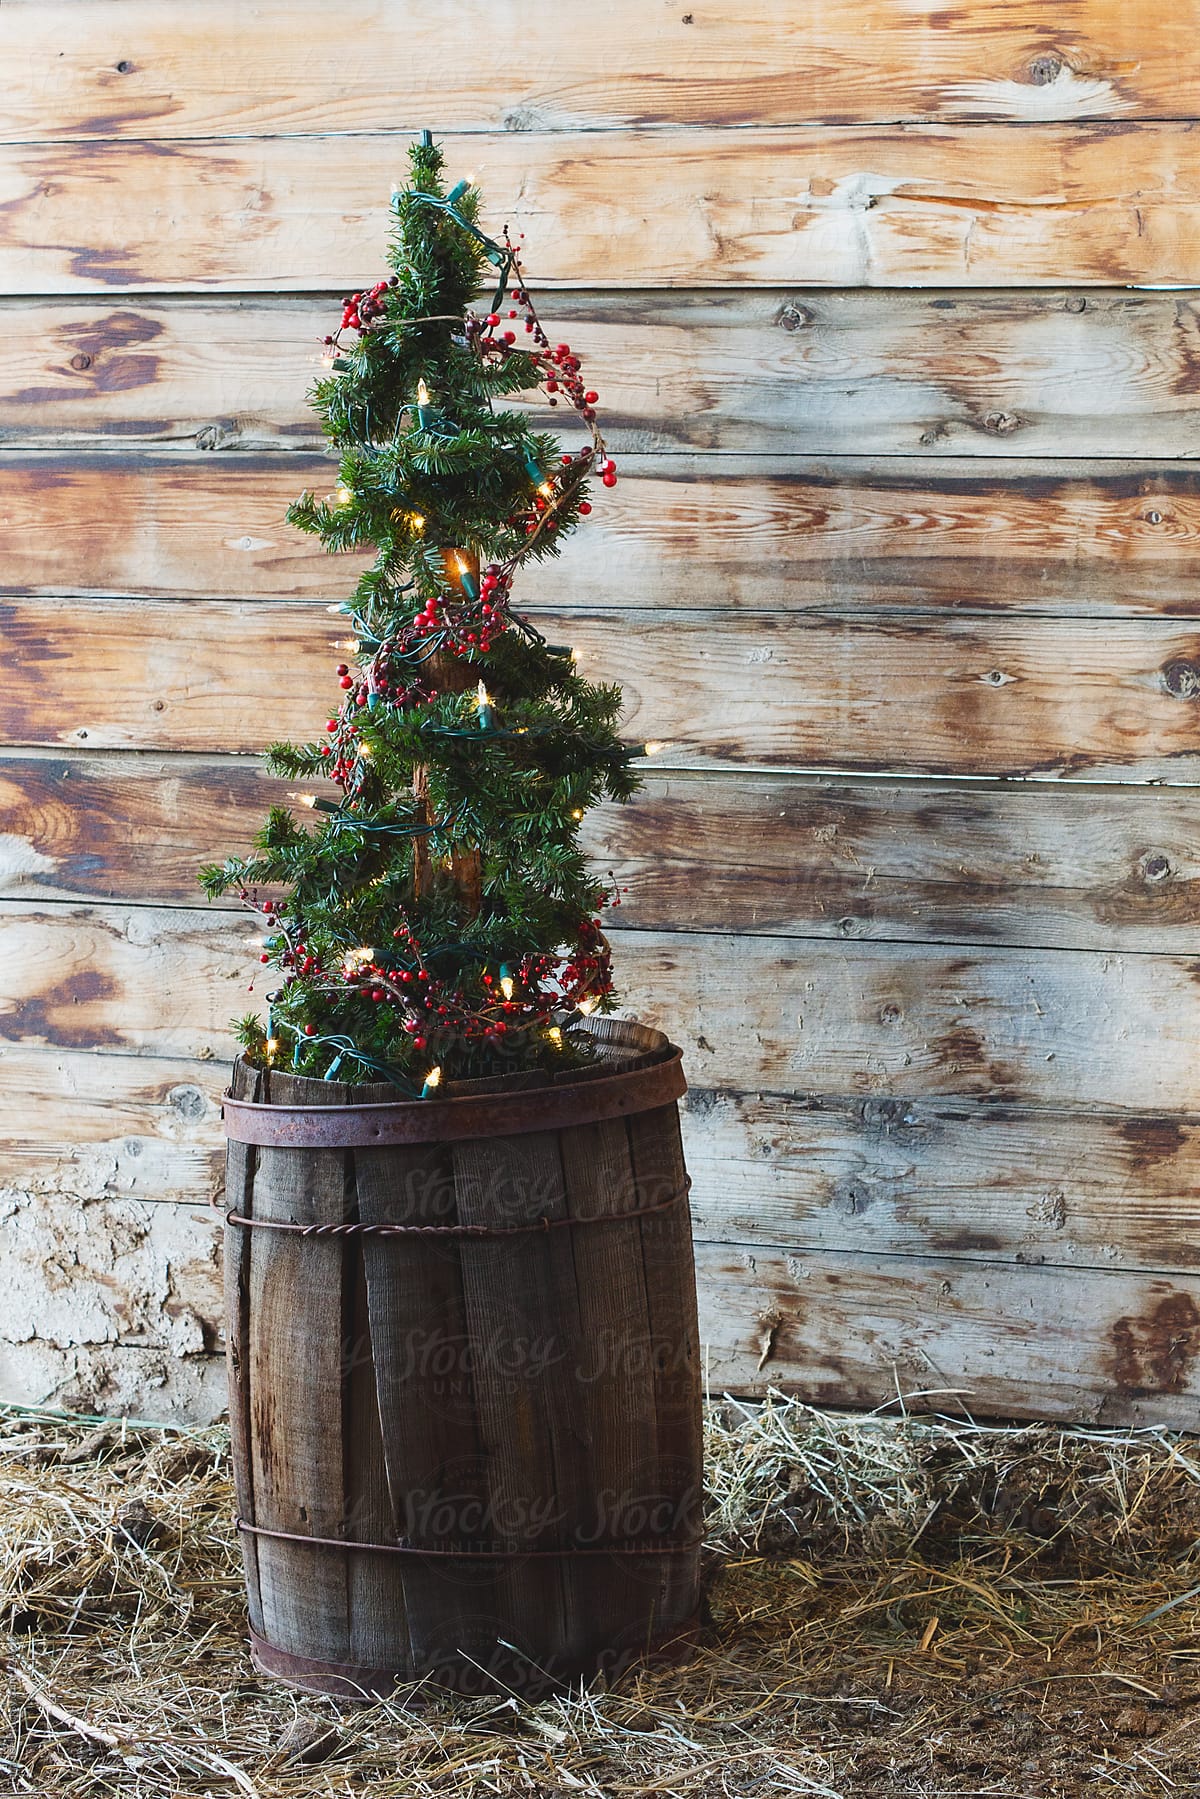 A rustic alpine tree decorated with lights sits inside antique barrel for the holidays